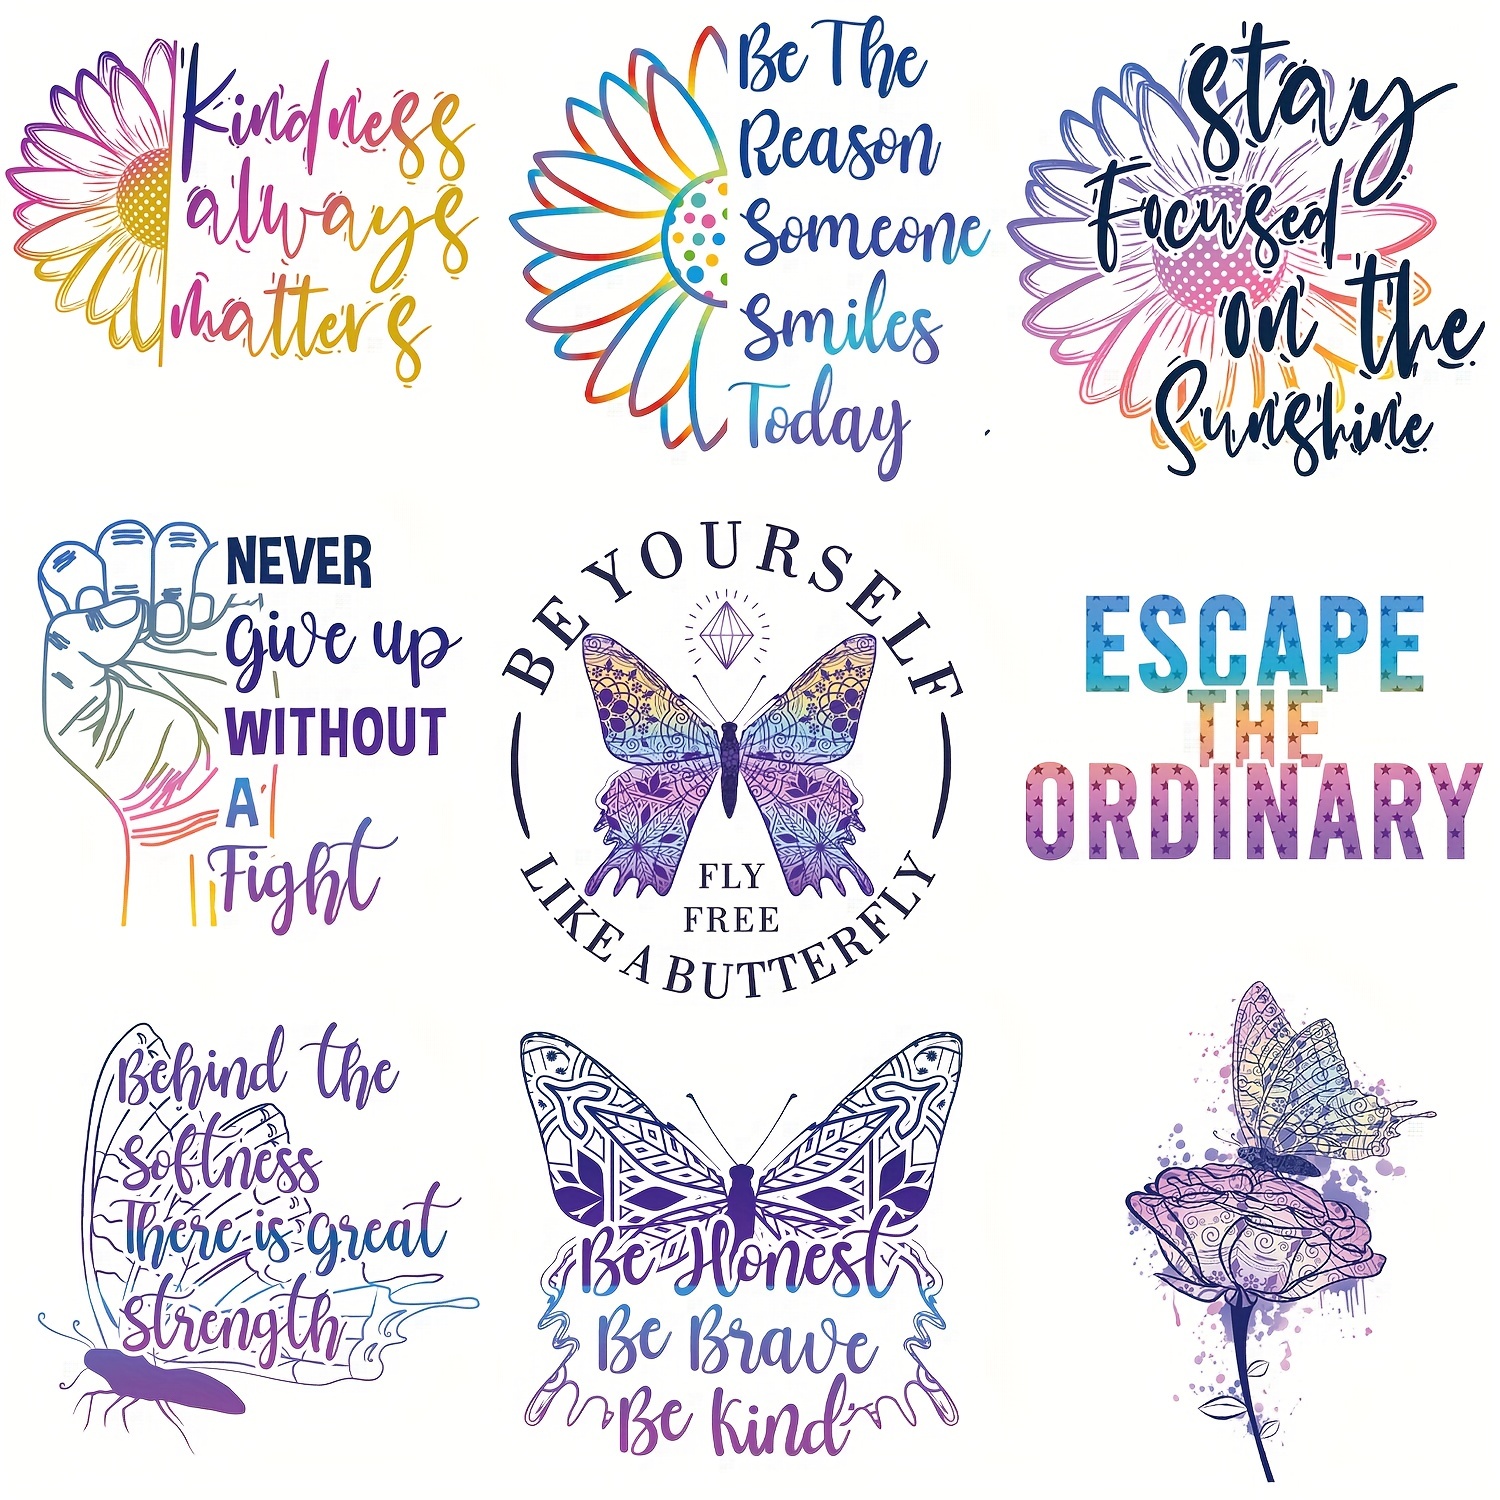 

9pcs Pocket Size Motivational Quotes Patches Diy Clothing Decoration Kindness Iron-on Heat Transfer Stickers Best Wishes Heat Press Appliqued Stickers Decor T-shirt Decals